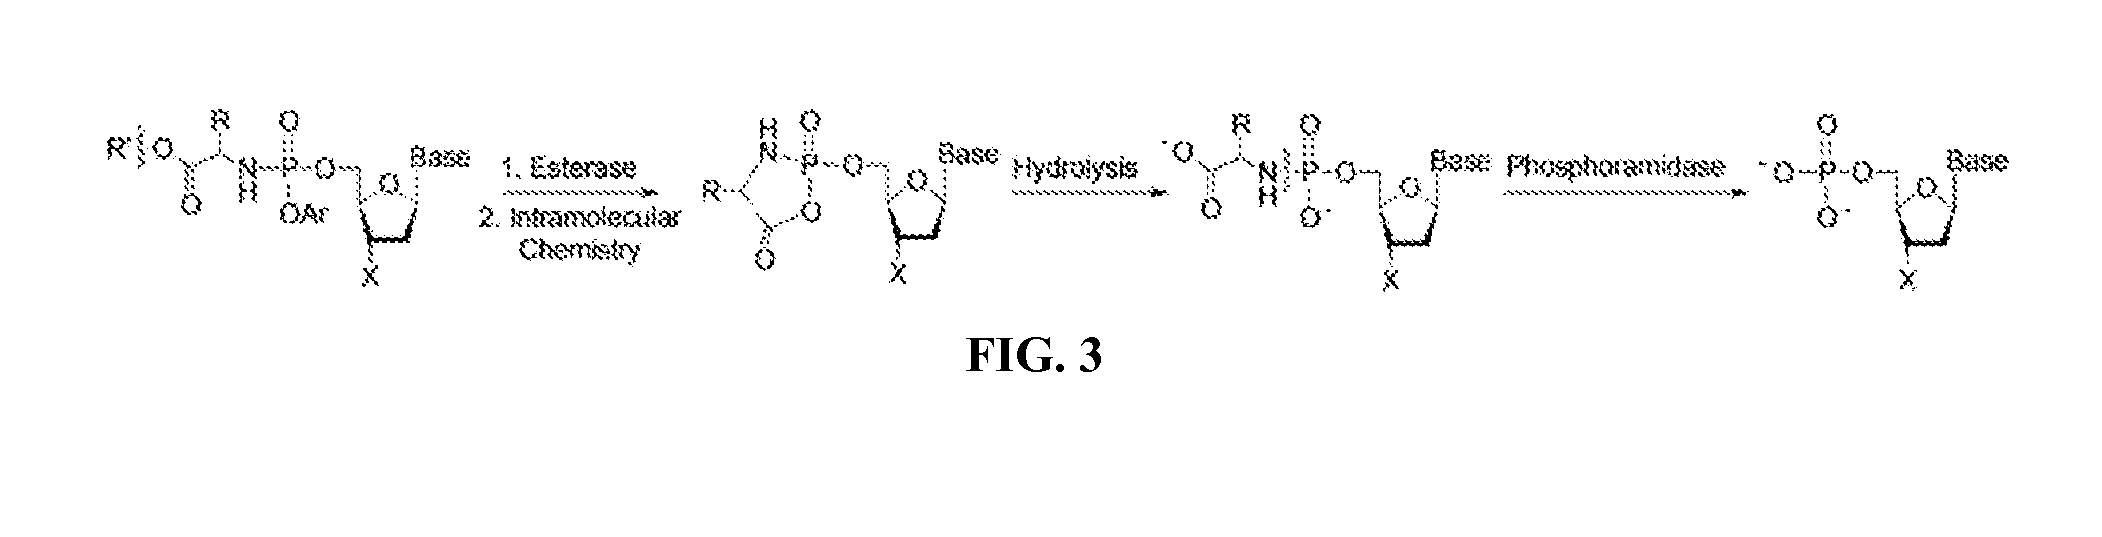 Nucleotide and nucleoside therapeutic compositions and uses related thereto